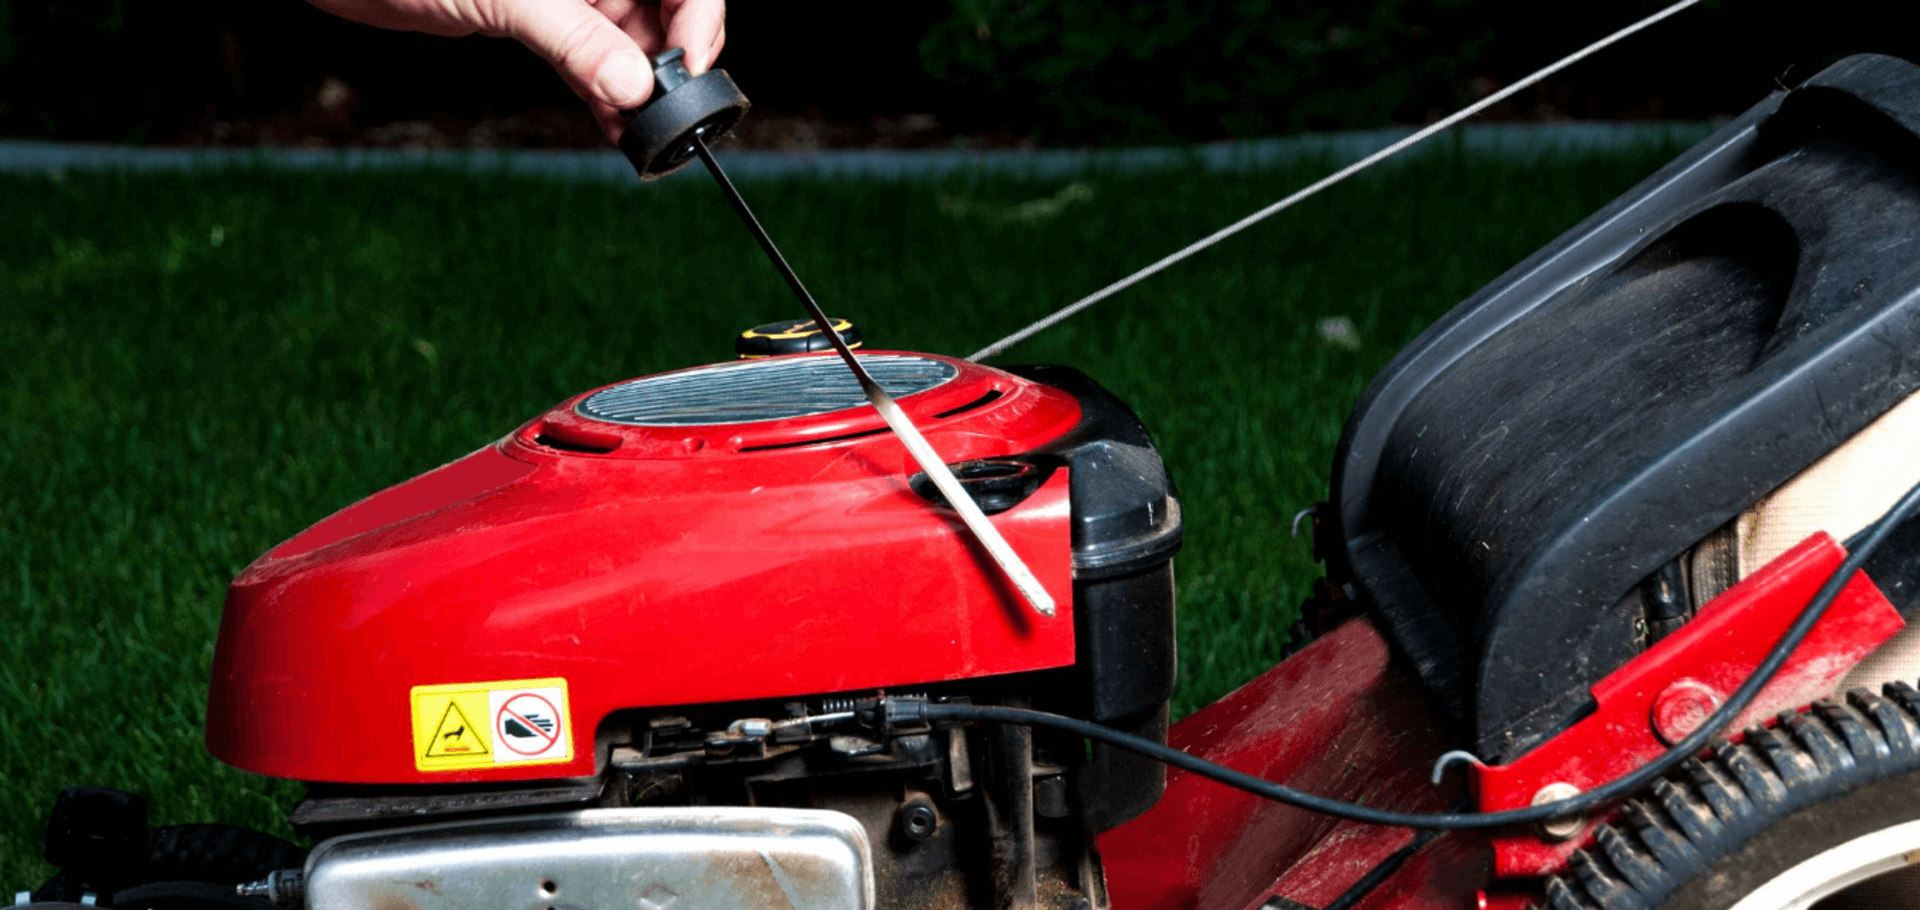 What kind of oil is best for your lawn mower?